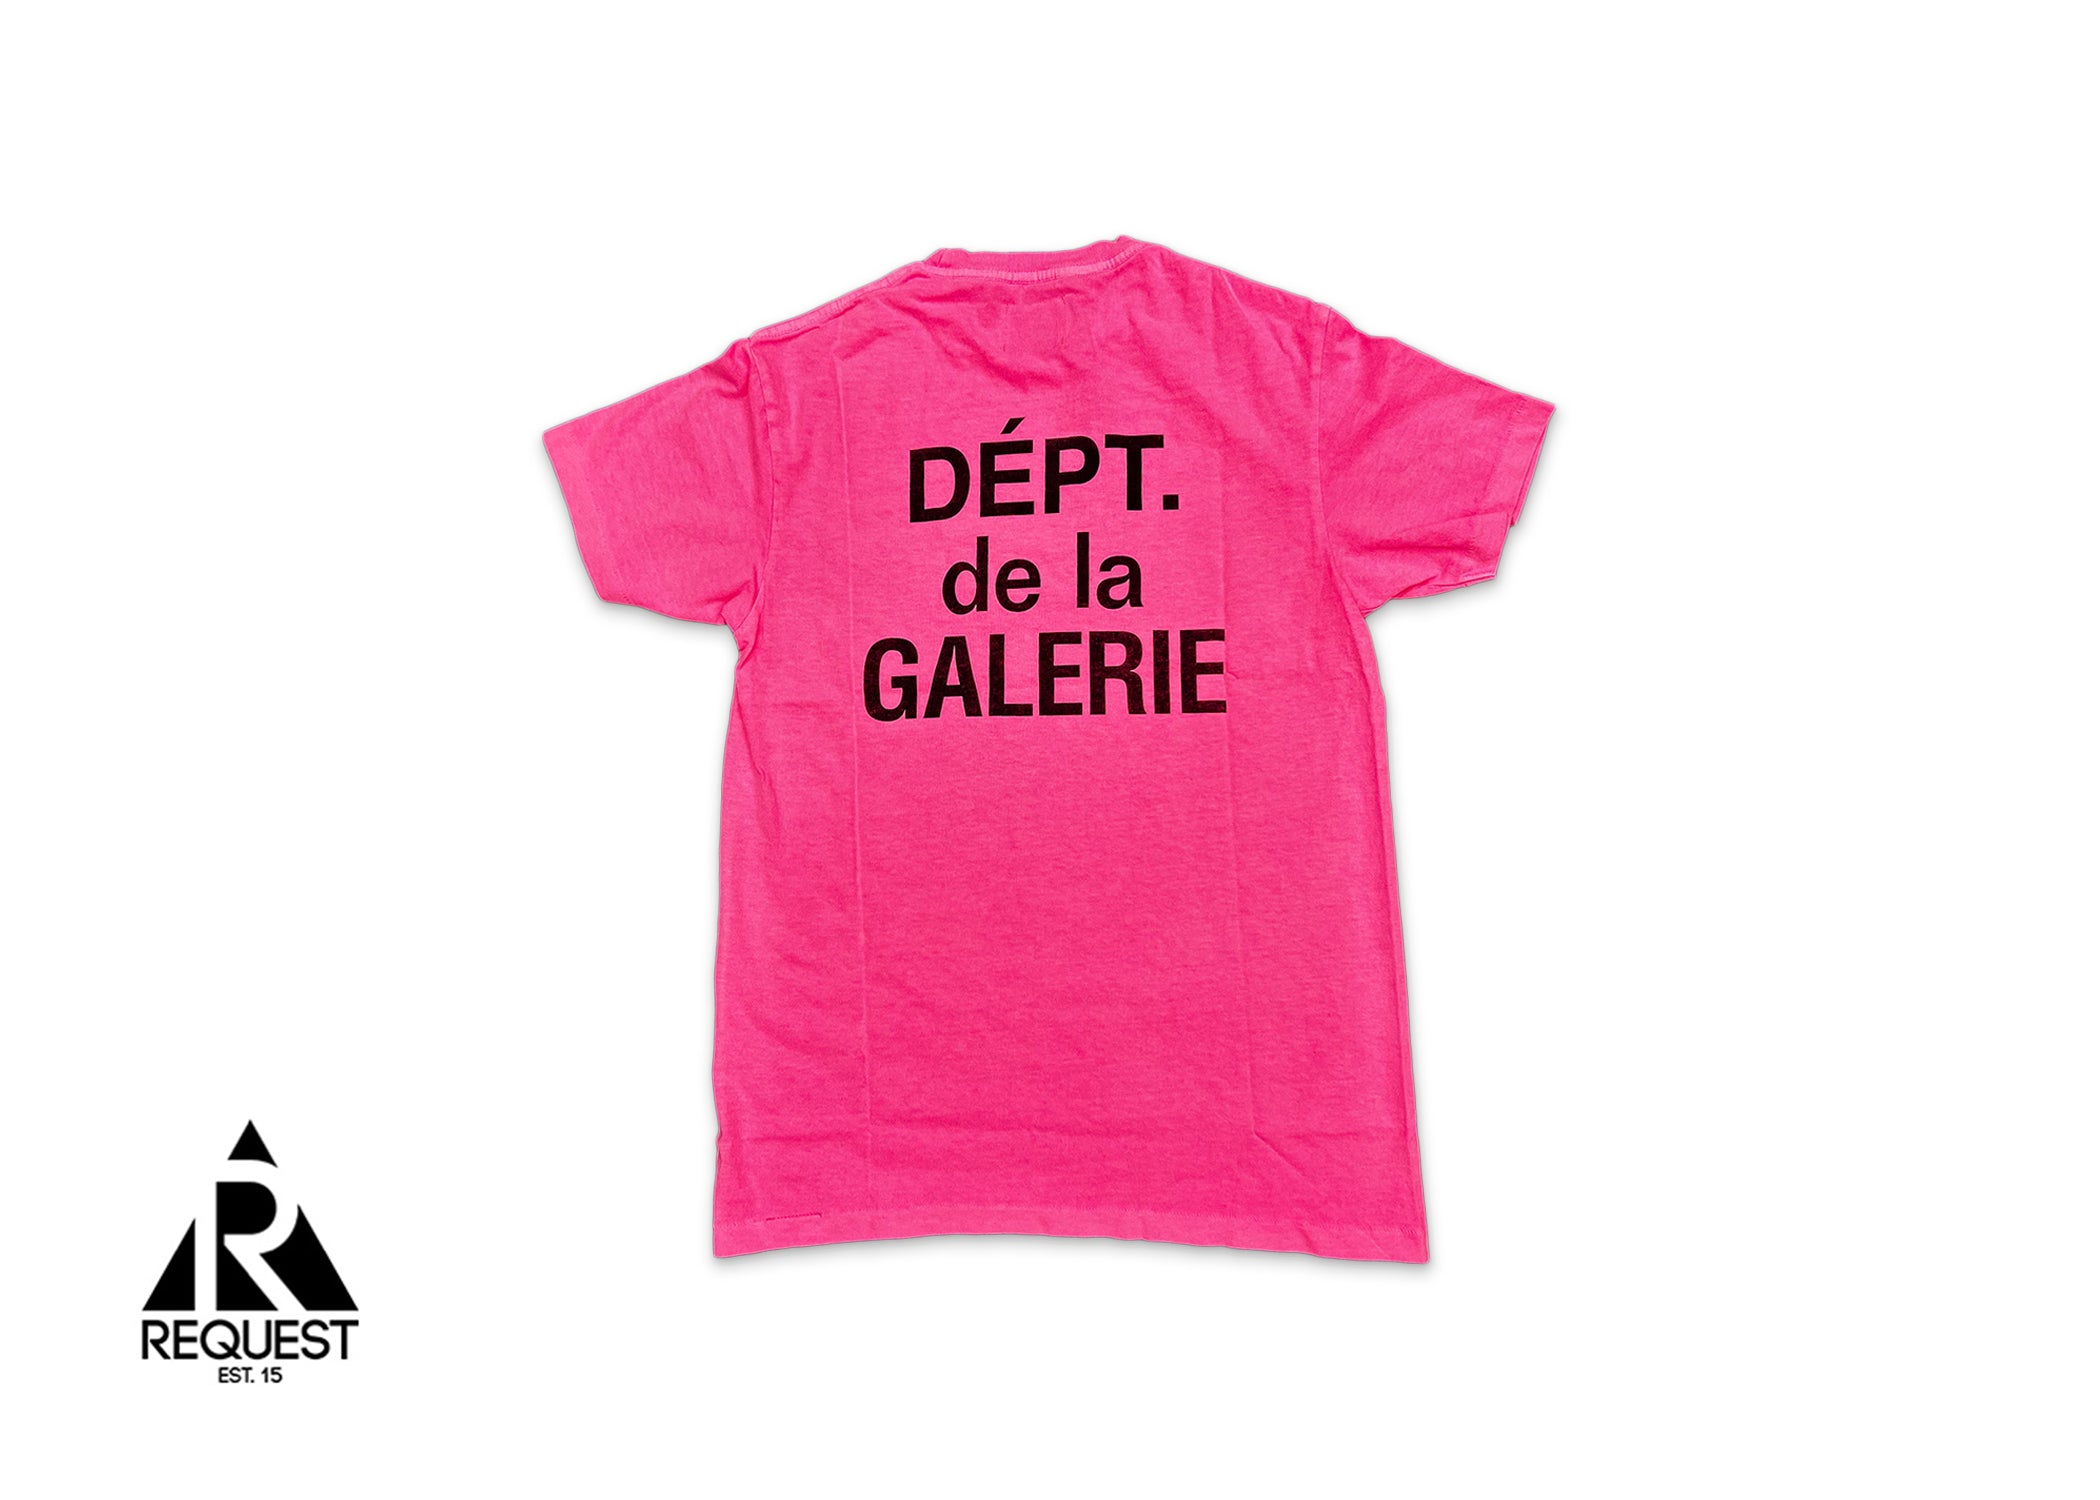 Gallery Dept. French Tee "Flo Pink"